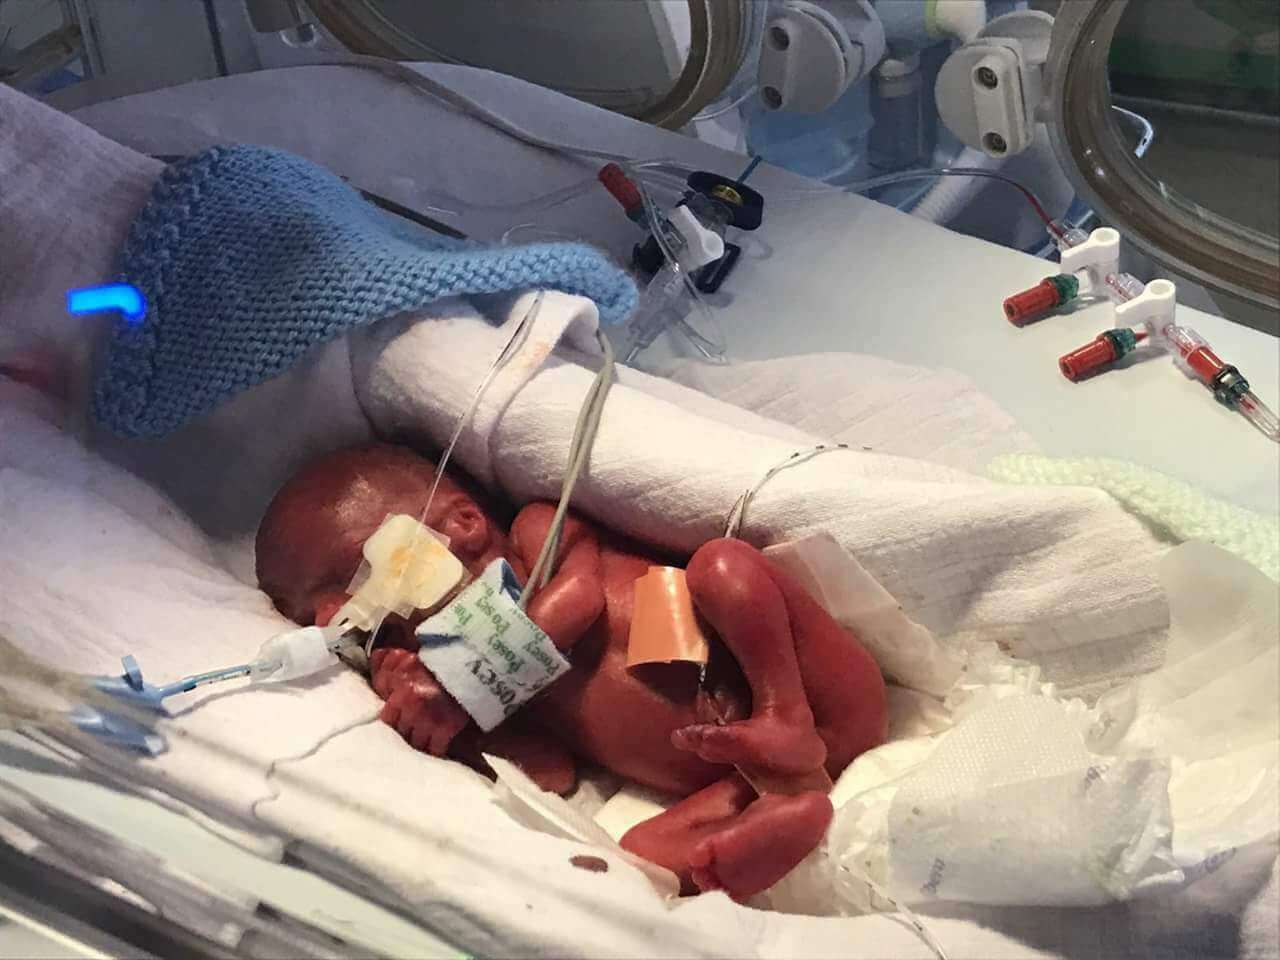 New born baby in an incubator with breathing tubes and monitoring wires